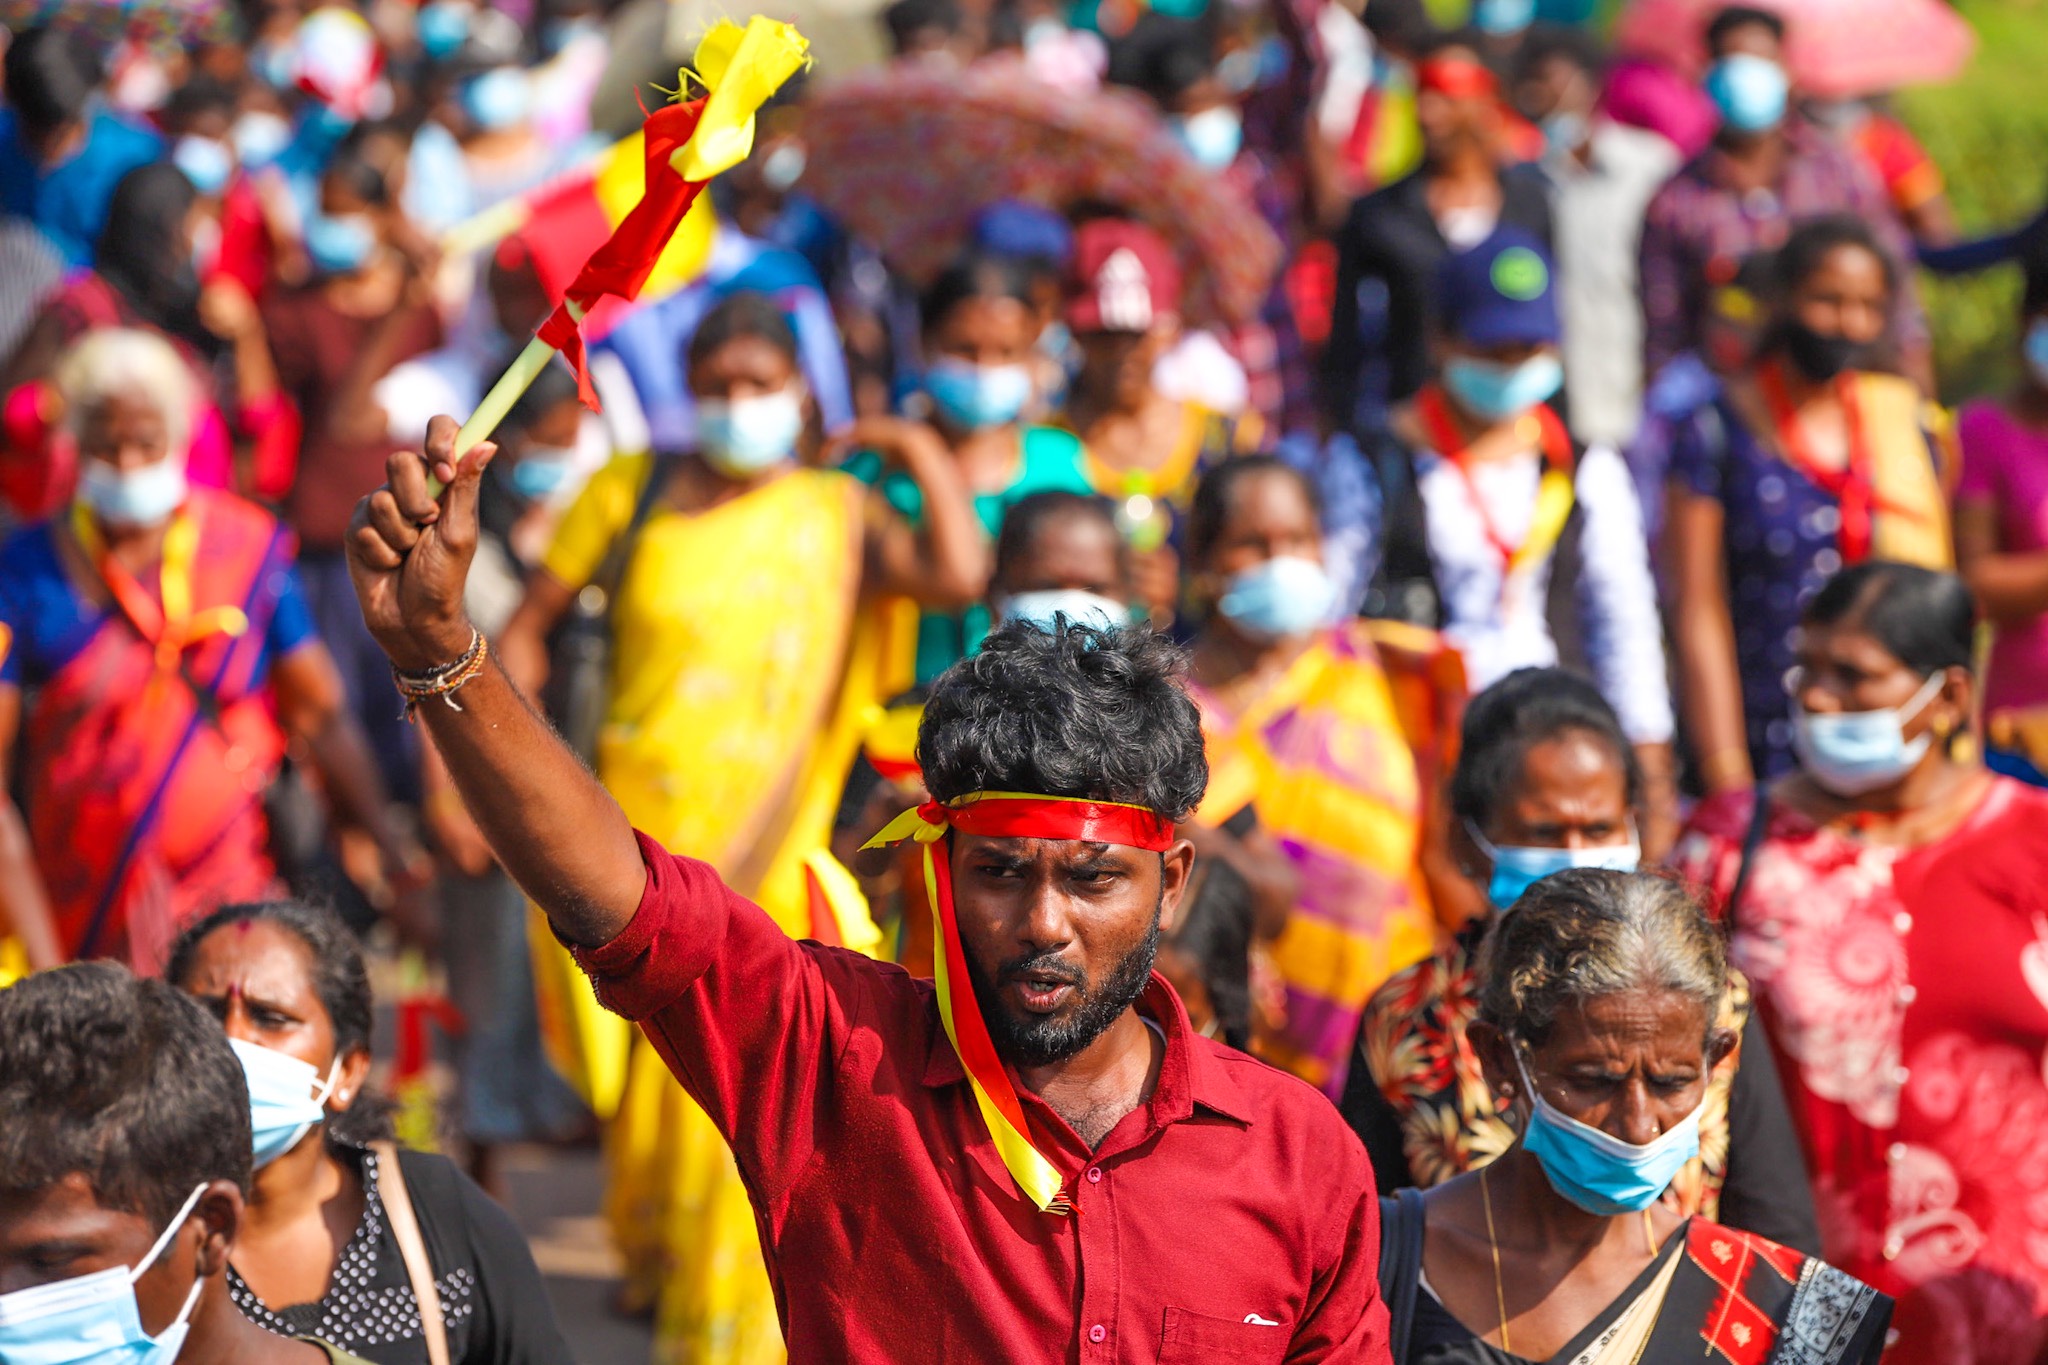 Tamils rally to reject 13A and demand self-determination | Tamil Guardian